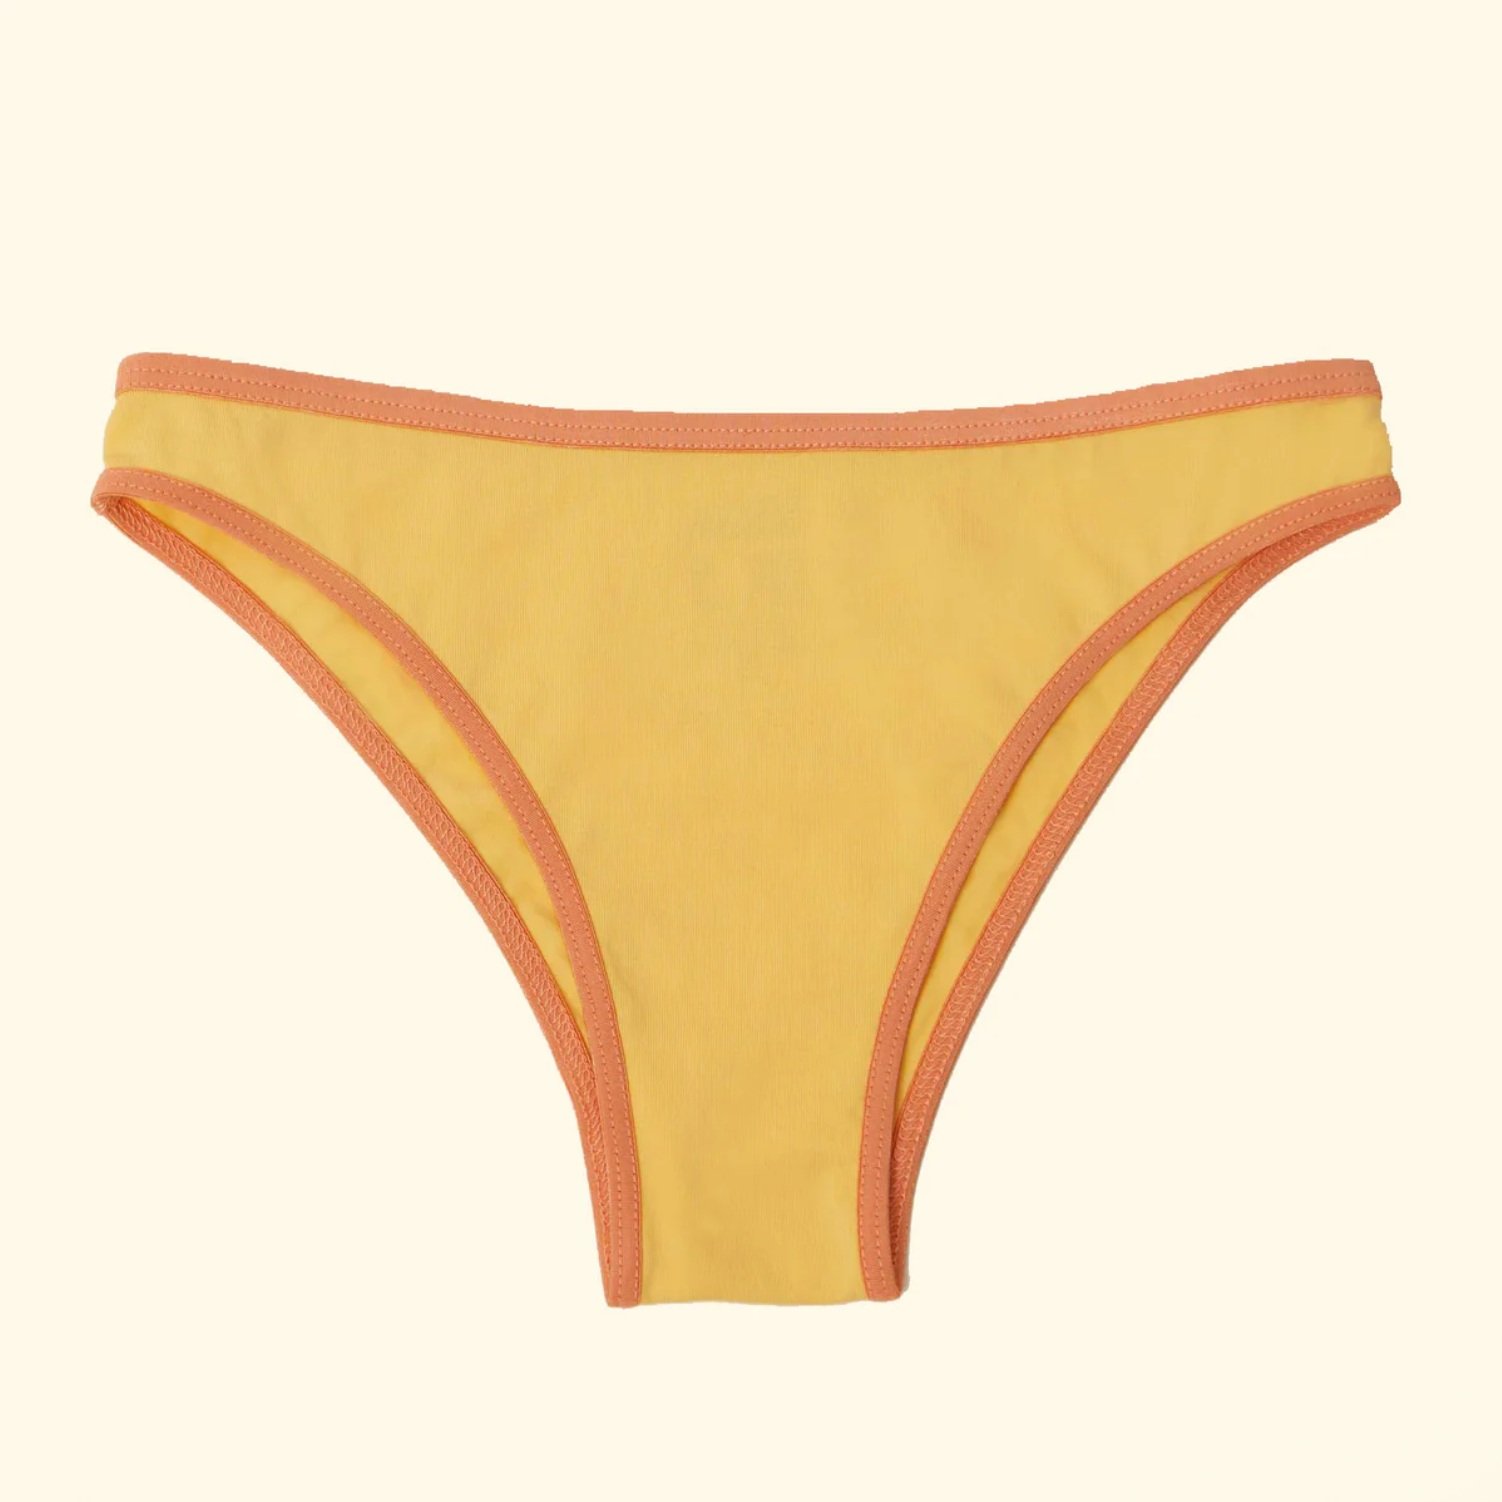 Top things you might find in your underwear and what it could mean